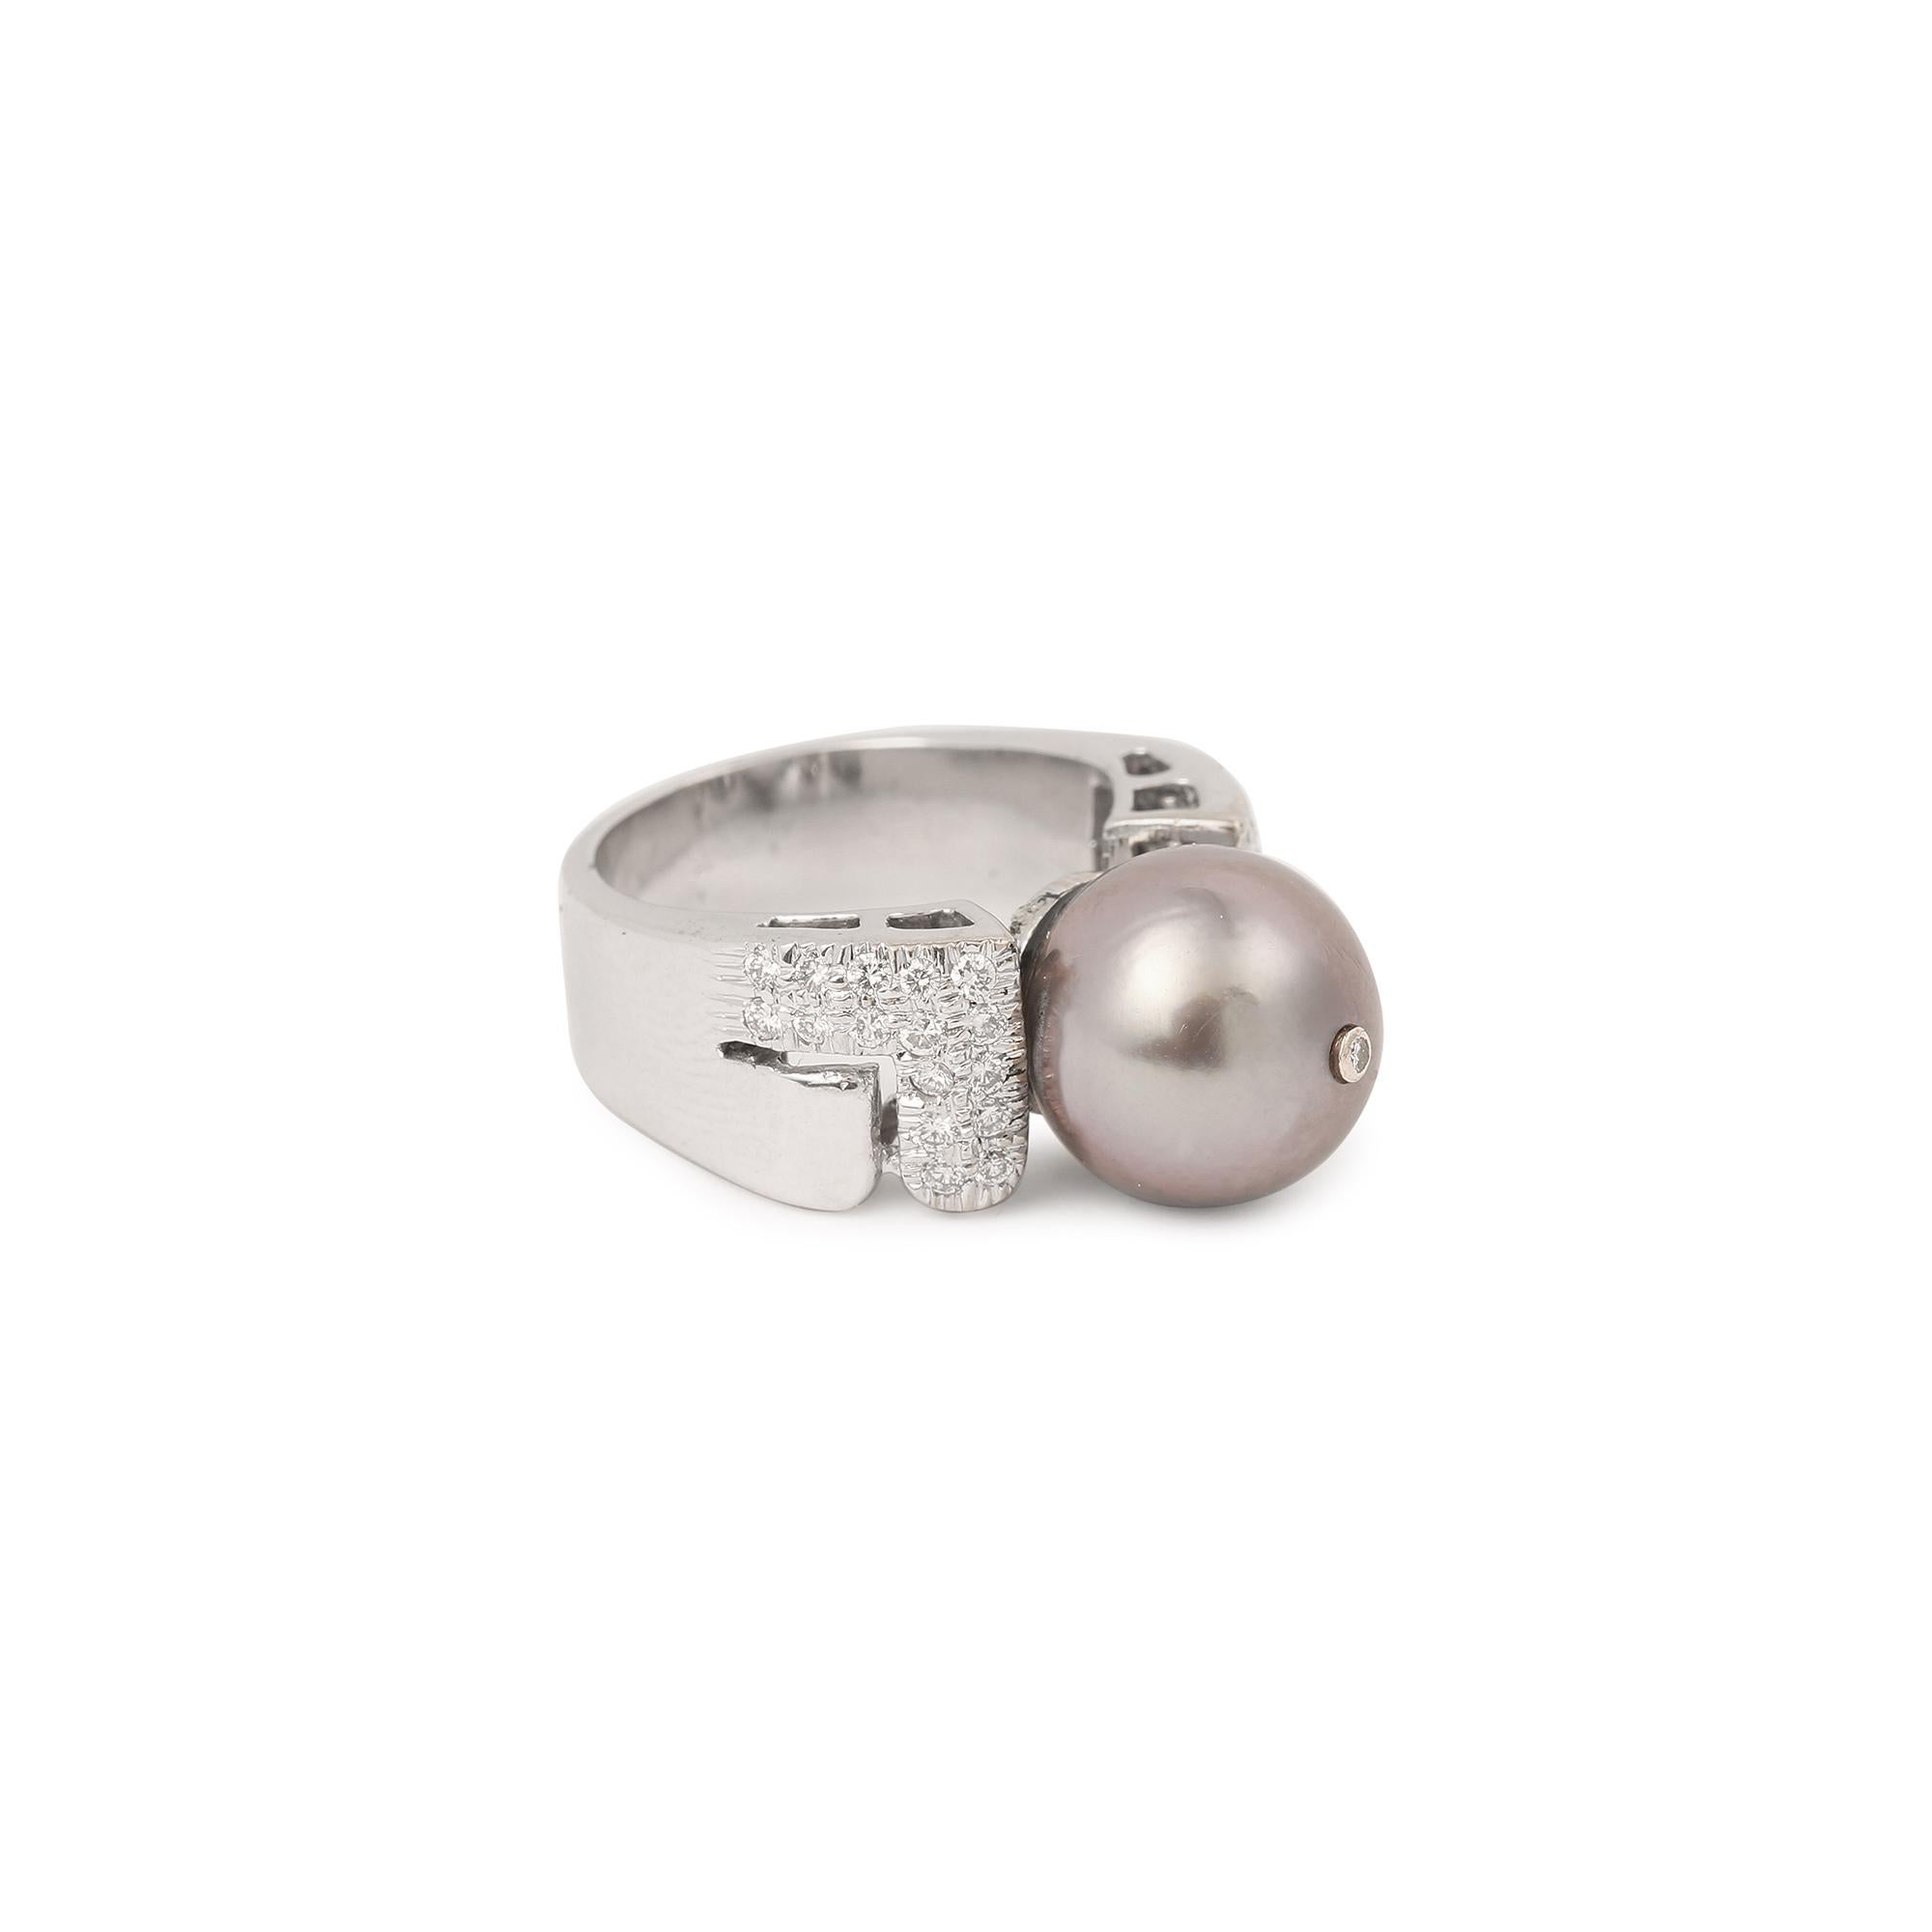 Beautiful white gold ring semi-paved with brilliant-cut diamonds and adorned in its center with a baroque pearl of Tahiti.

Slight growth areas are visible on the pearl.

Diameter of the pearl : 11.10 mm (0.437 inch)

Total estimated weight of the